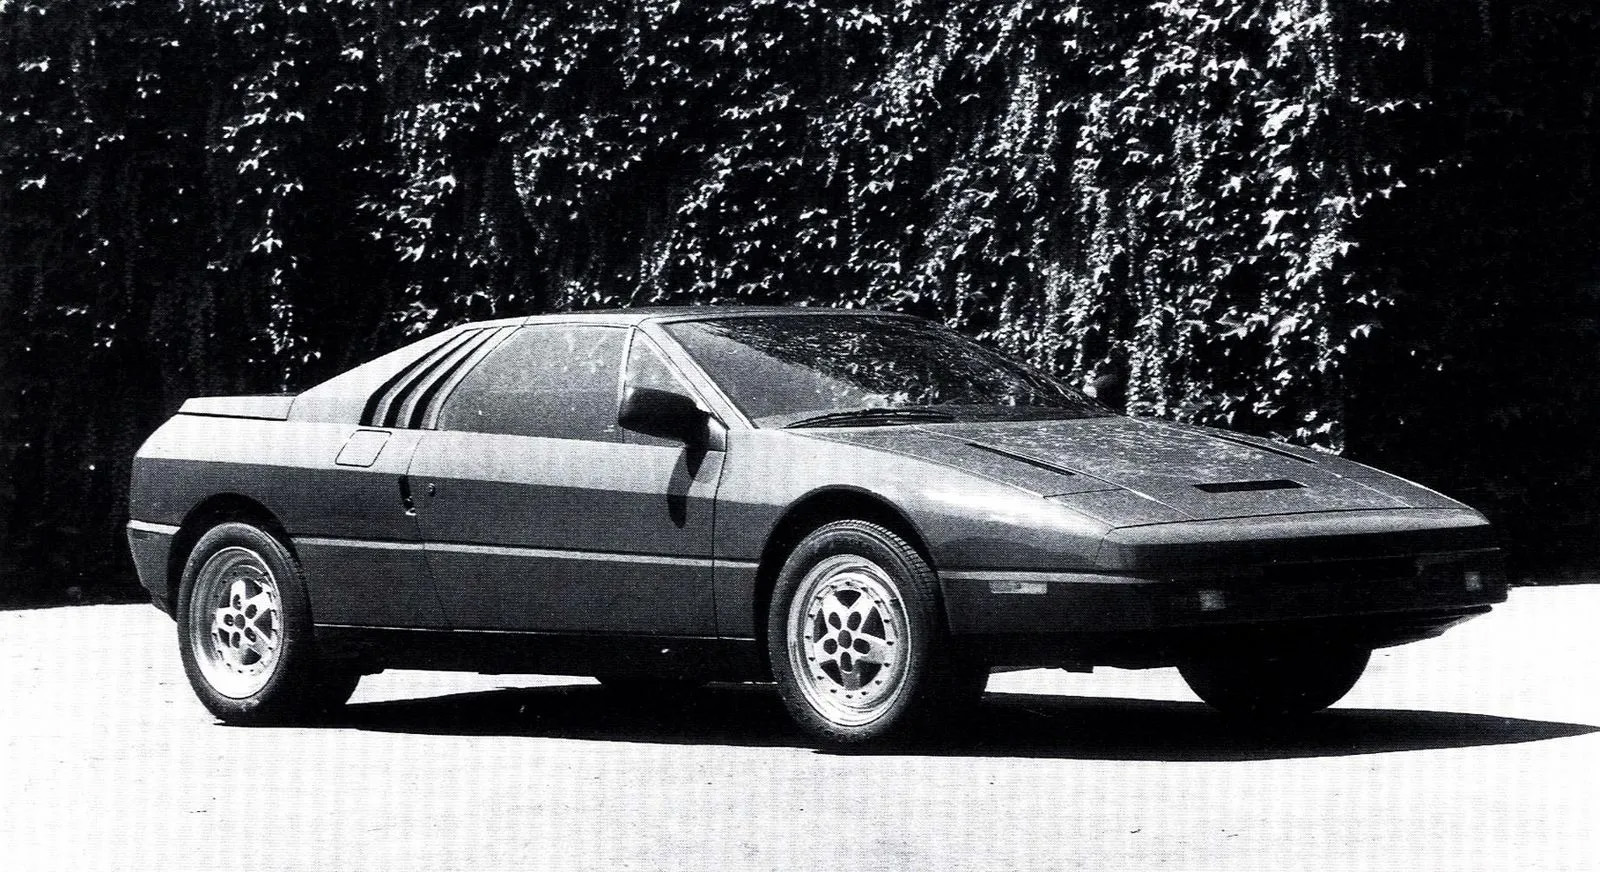 Italdesign Maya, the Ford Powered mid-engine supercar that became the GN34 concept car